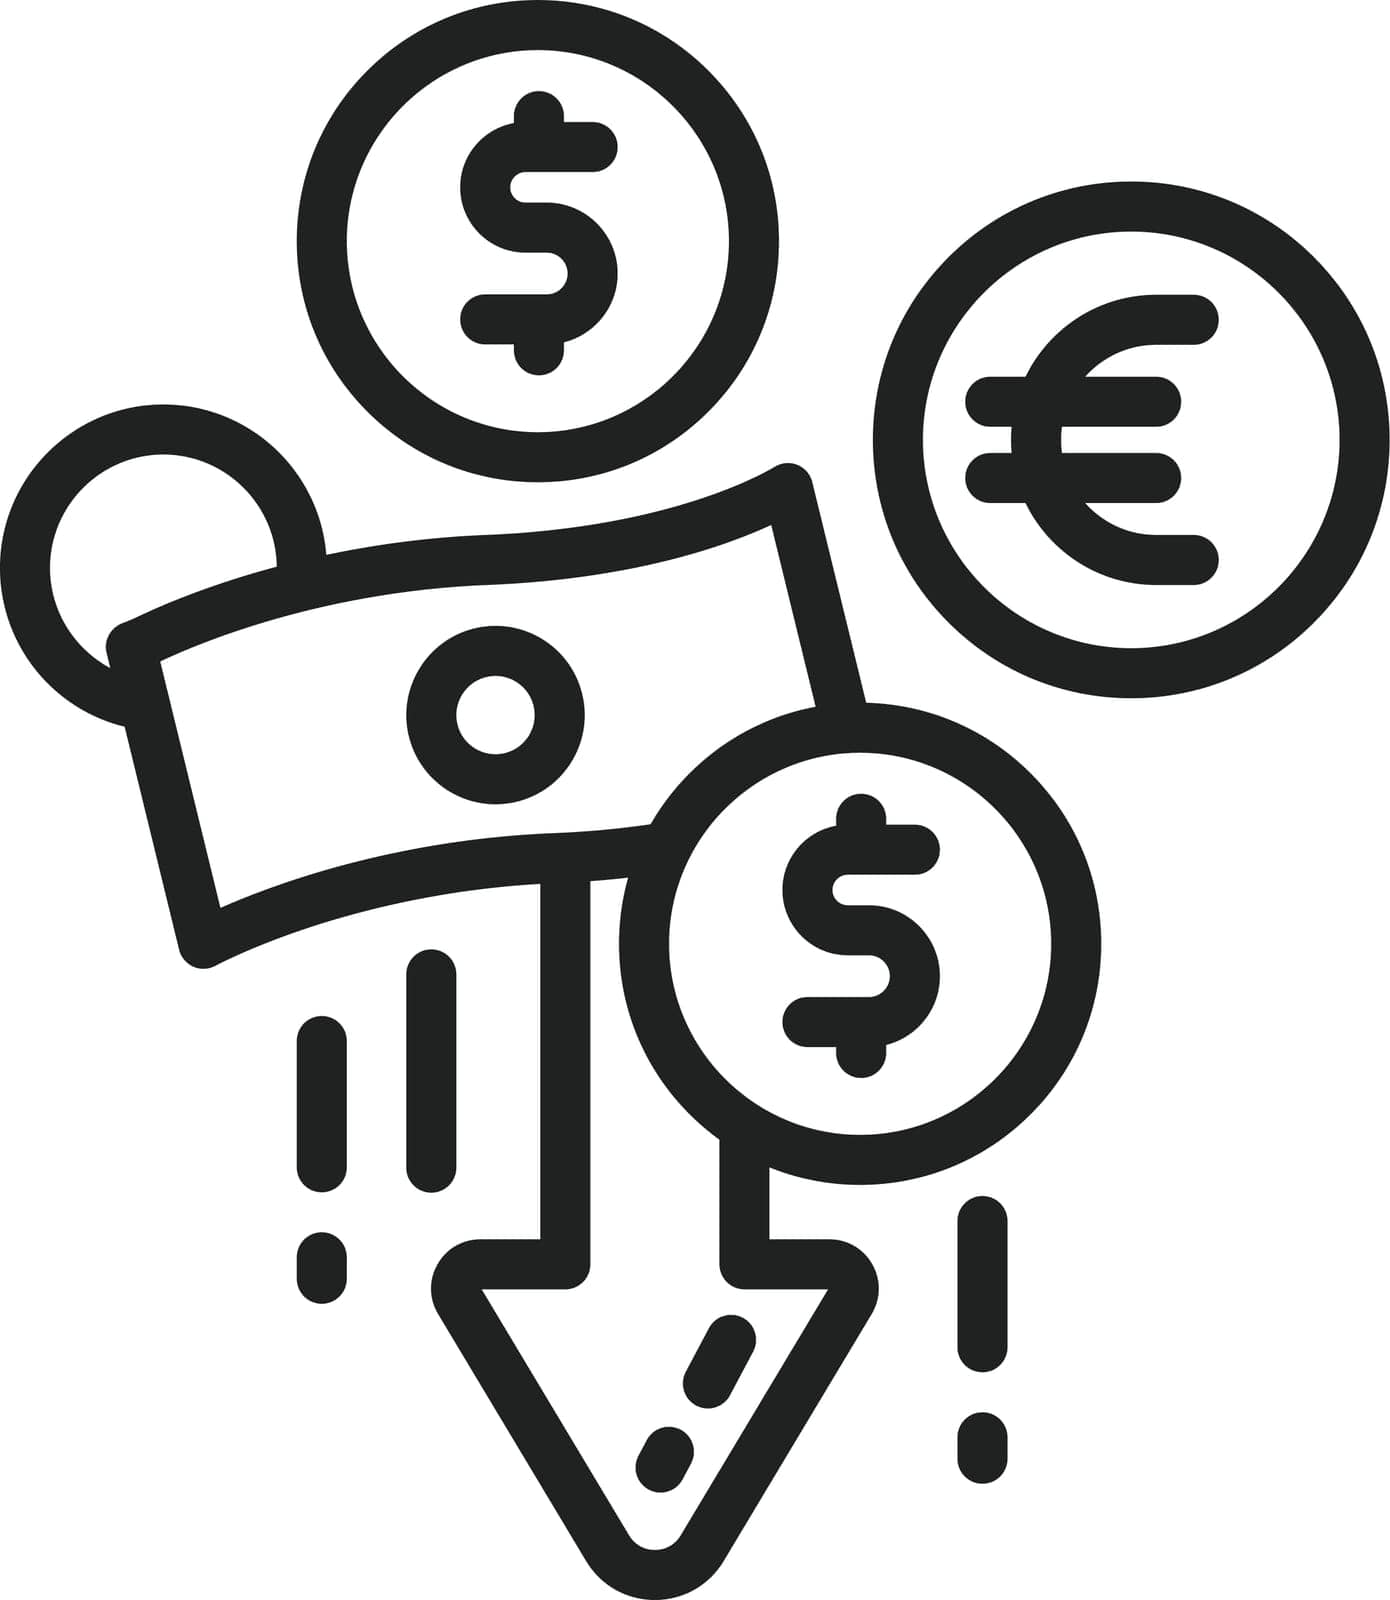 Currency Down icon vector image. Suitable for mobile application web application and print media.